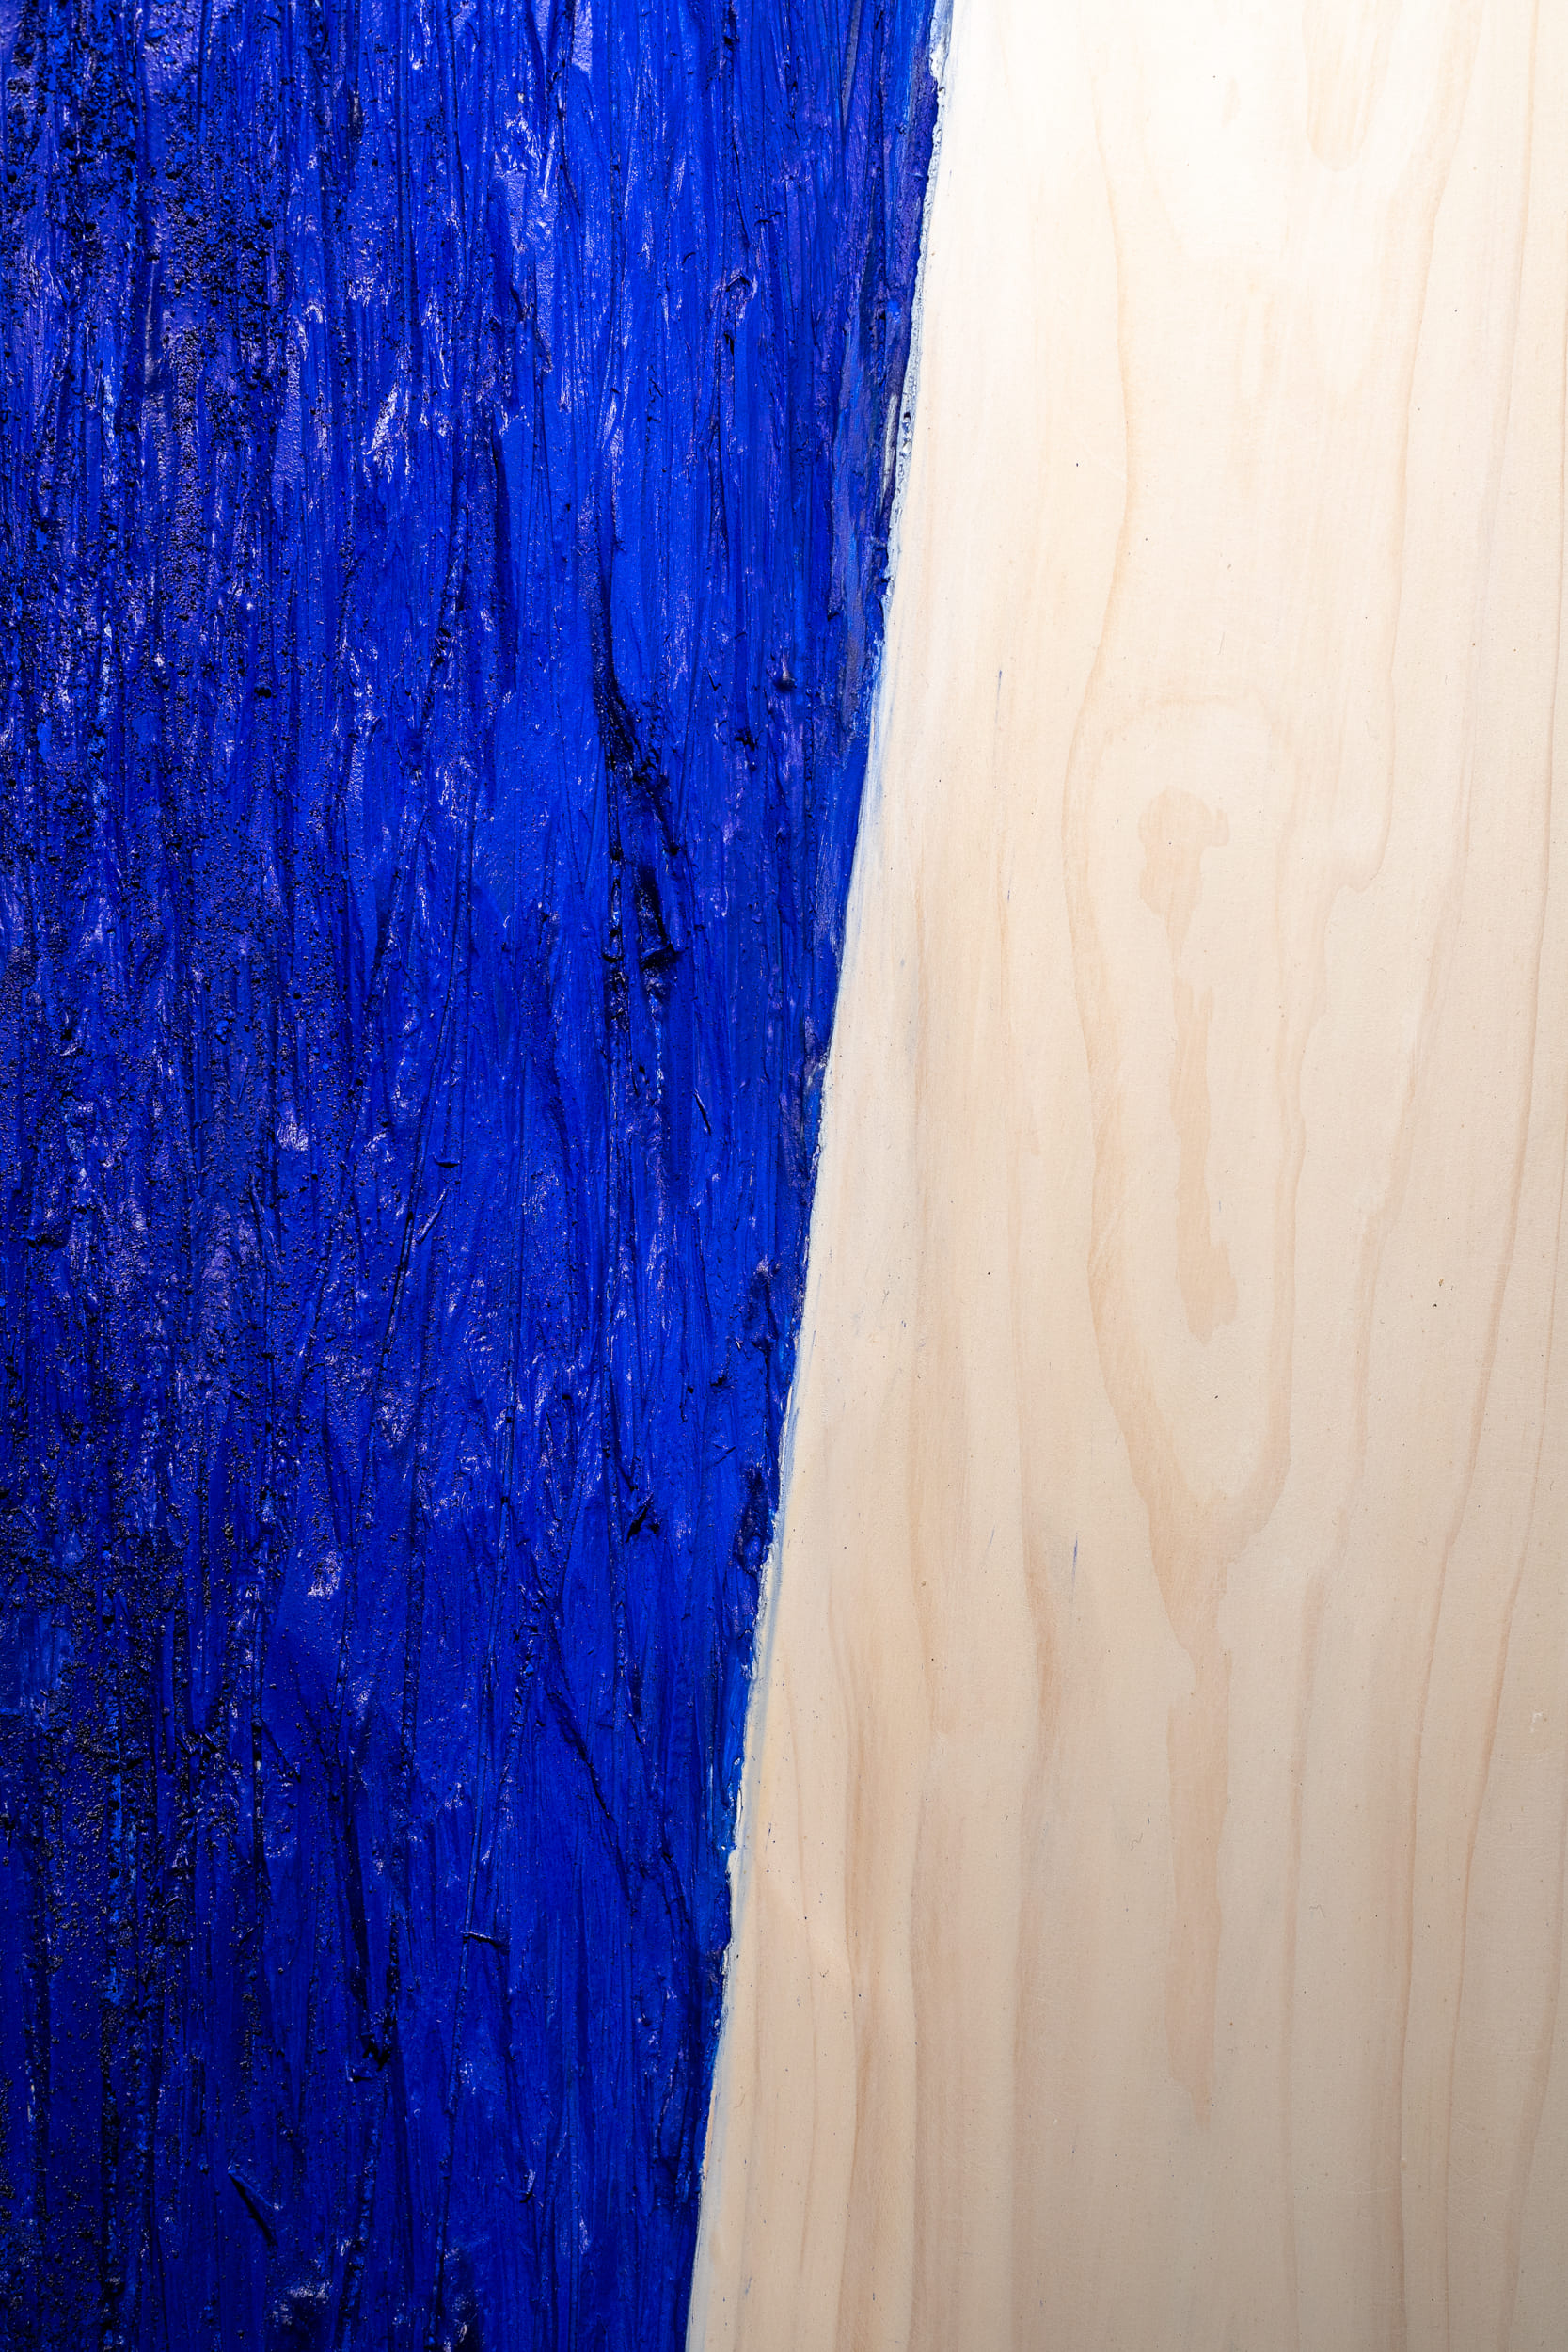 Wood painting N°20 (with blue pigment)2 copy